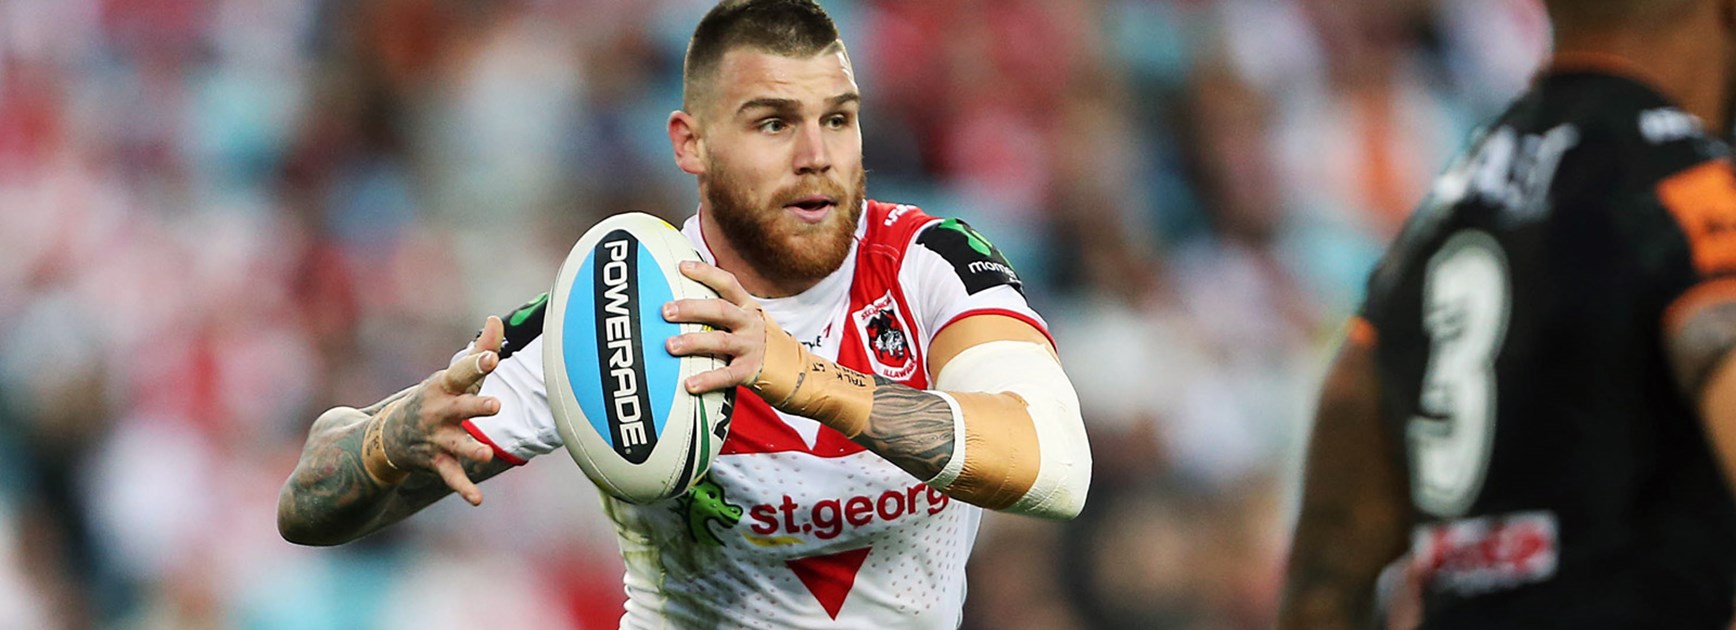 Josh Dugan is currently in negotiations to extend his stay at the Dragons.